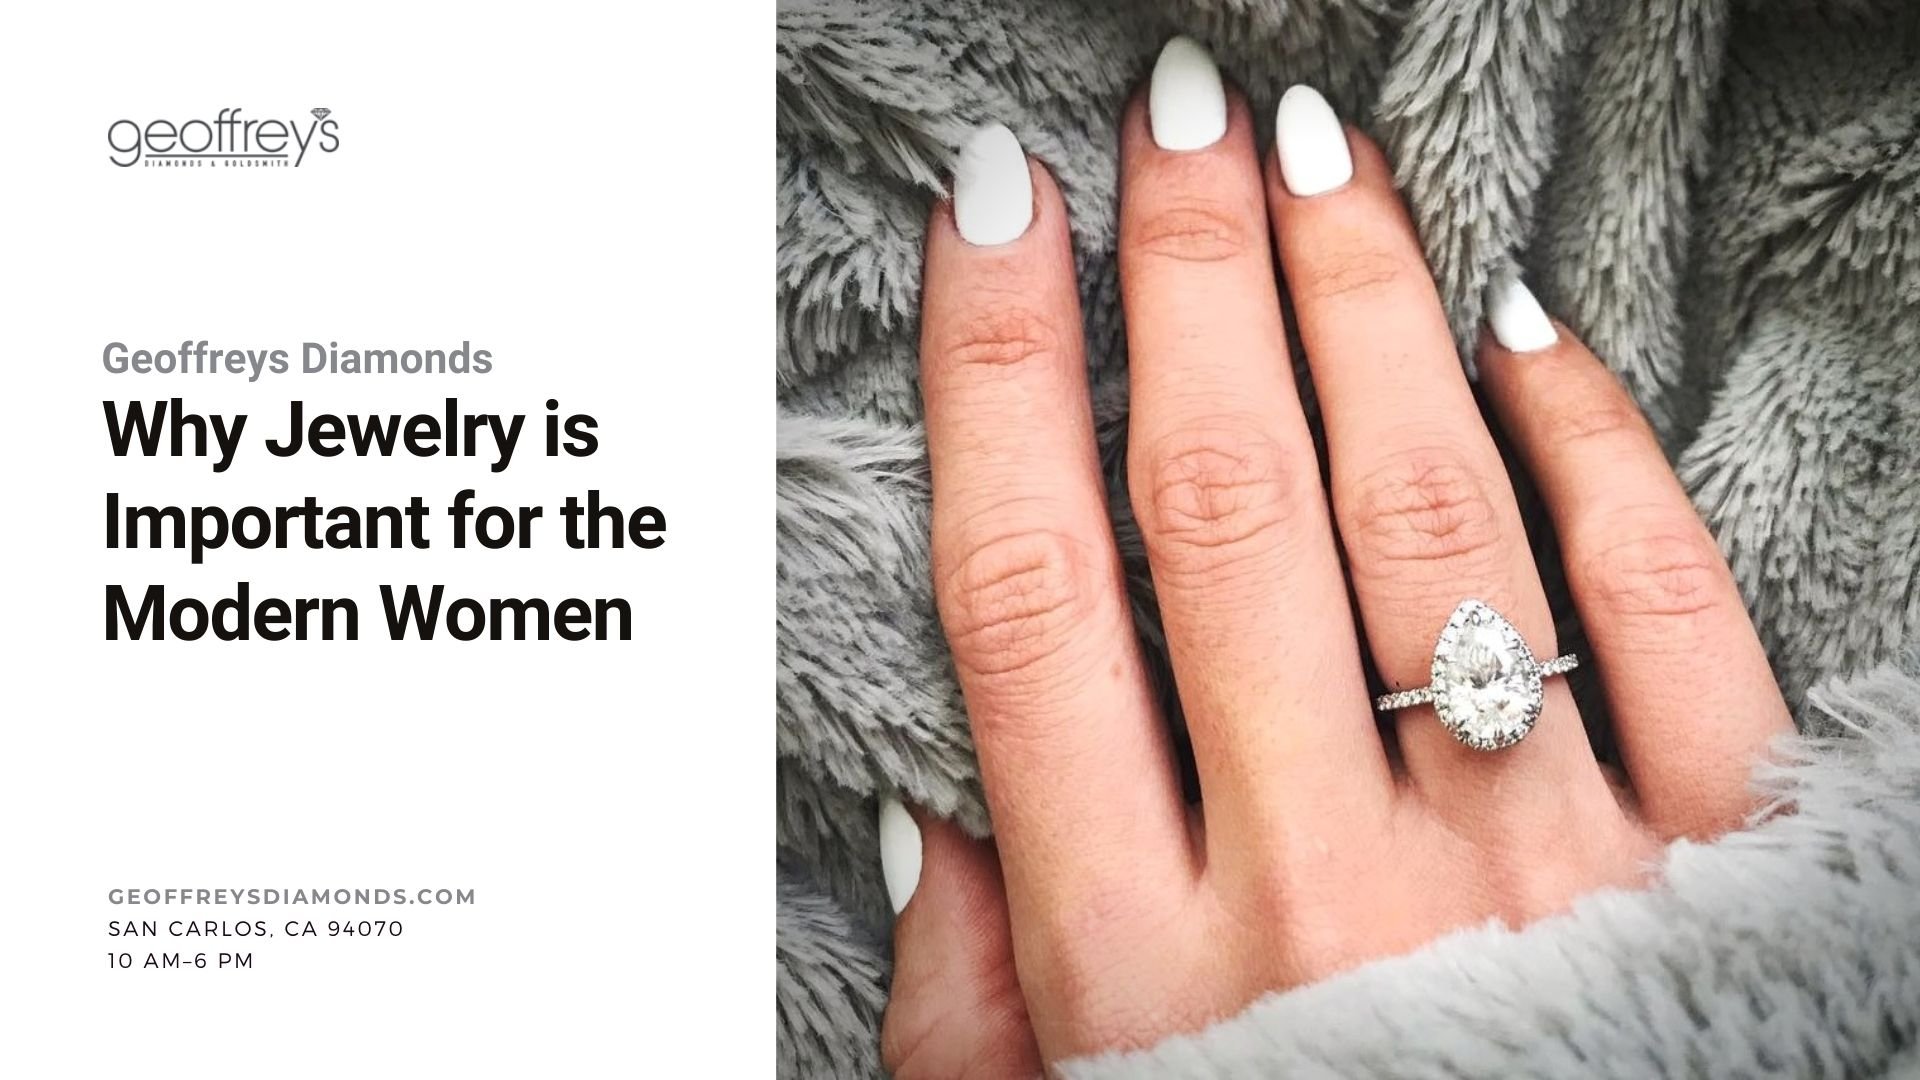 Why Jewelry is Important for the Modern Women